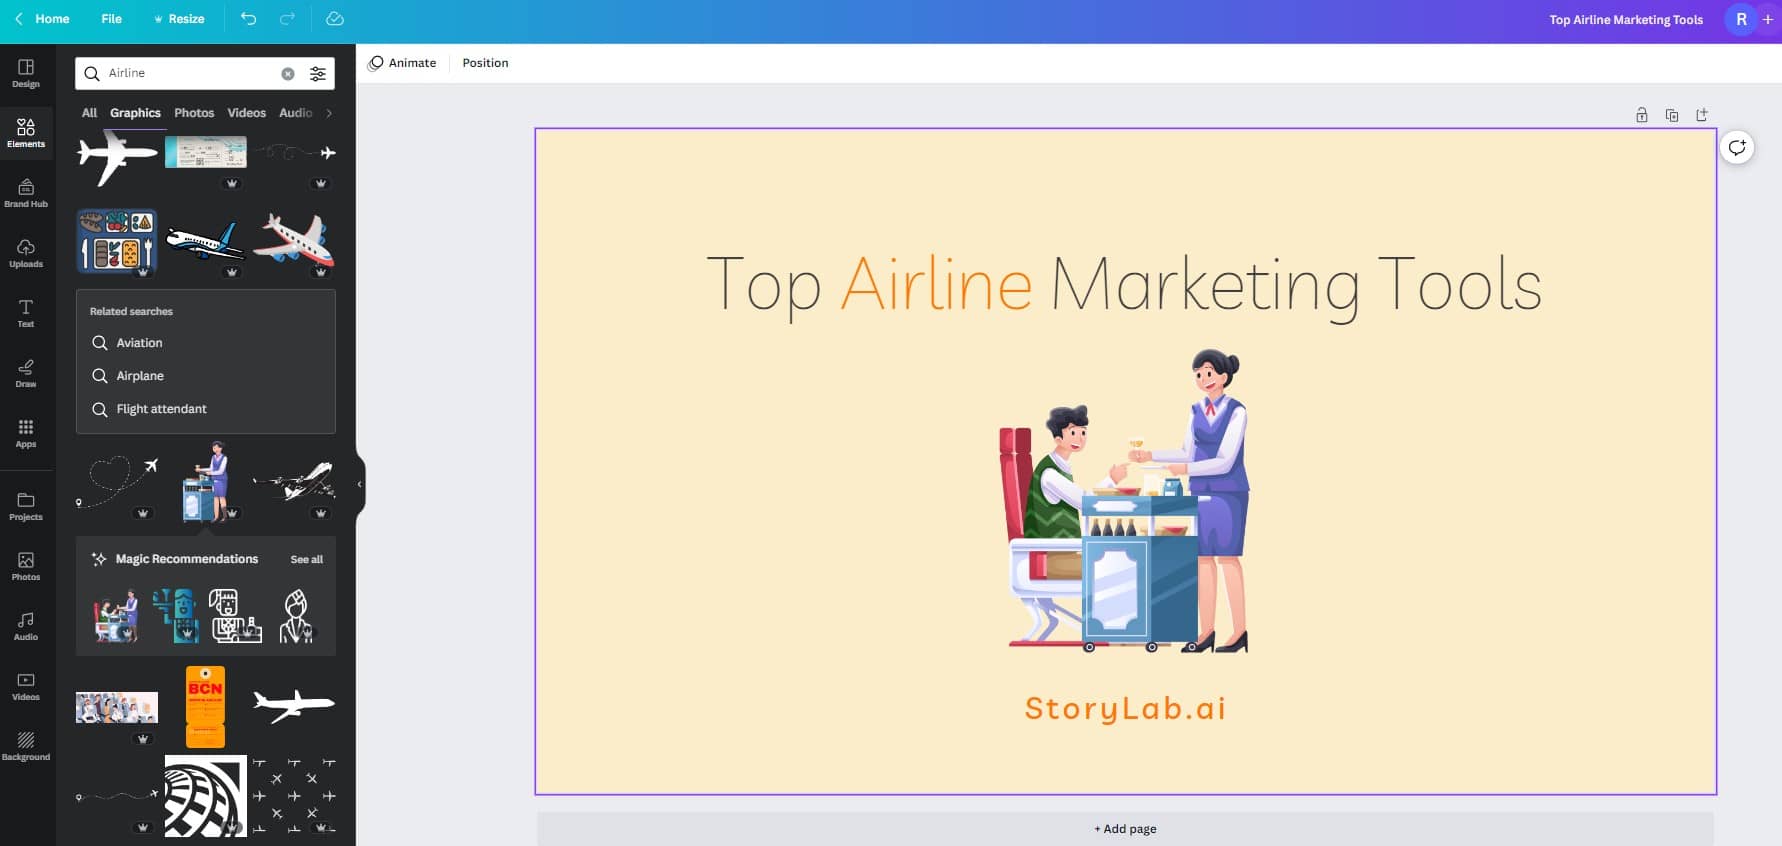 Airline Digital Marketing Tools - Canva Example